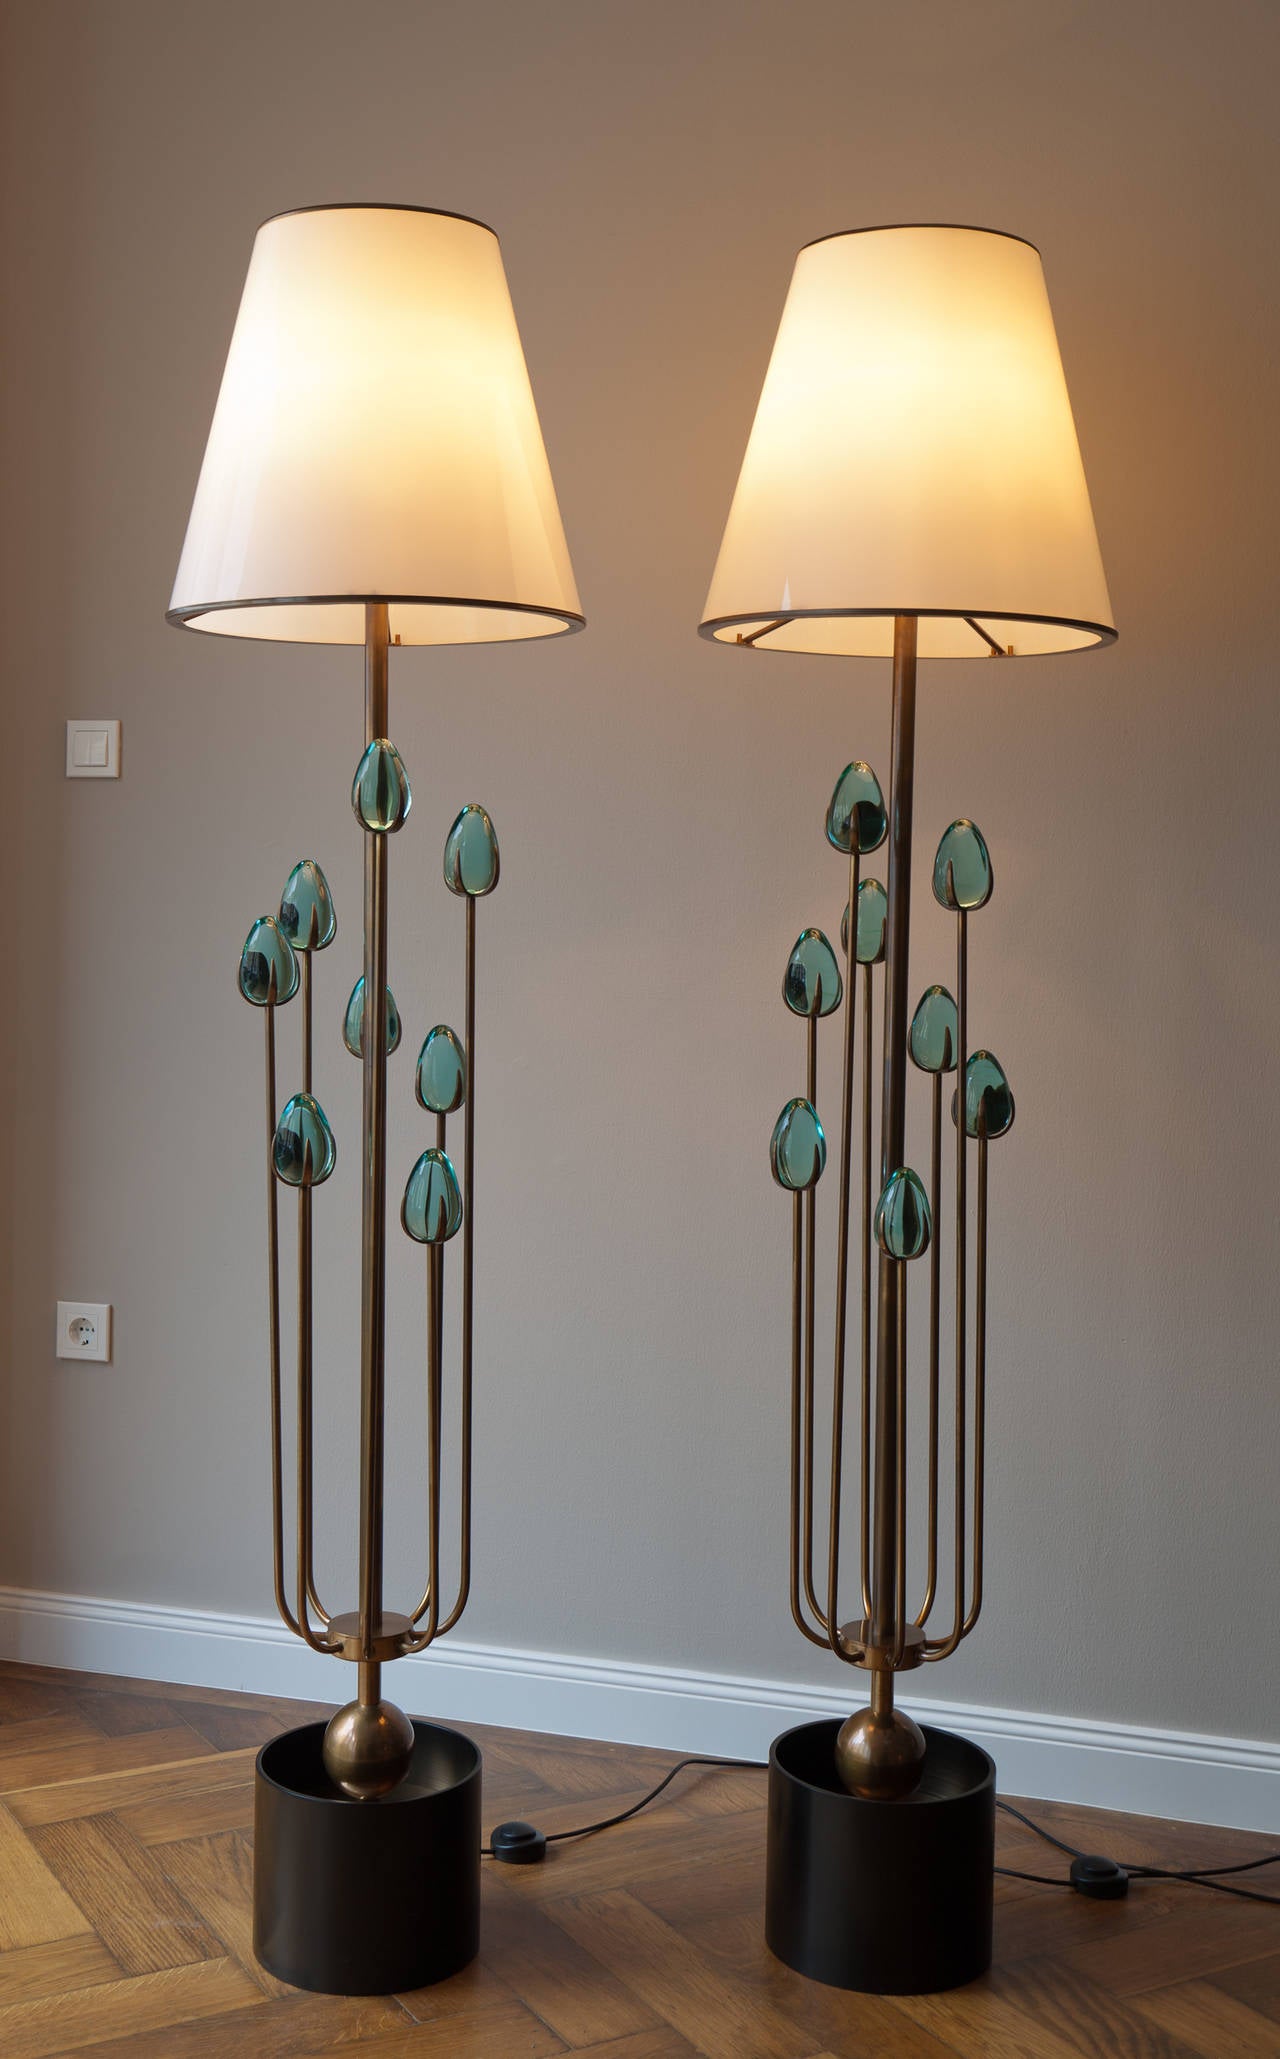 Pair of floor lamps by Roberto Giulio Rida
Base metal black matt lacquered, brass body patinated bronze, eight vertical arms surmounted by eight cotton seed crystal hand-ground, glass shade, white diffuser vintage.
Unique Piece, Italy 2014
Signed